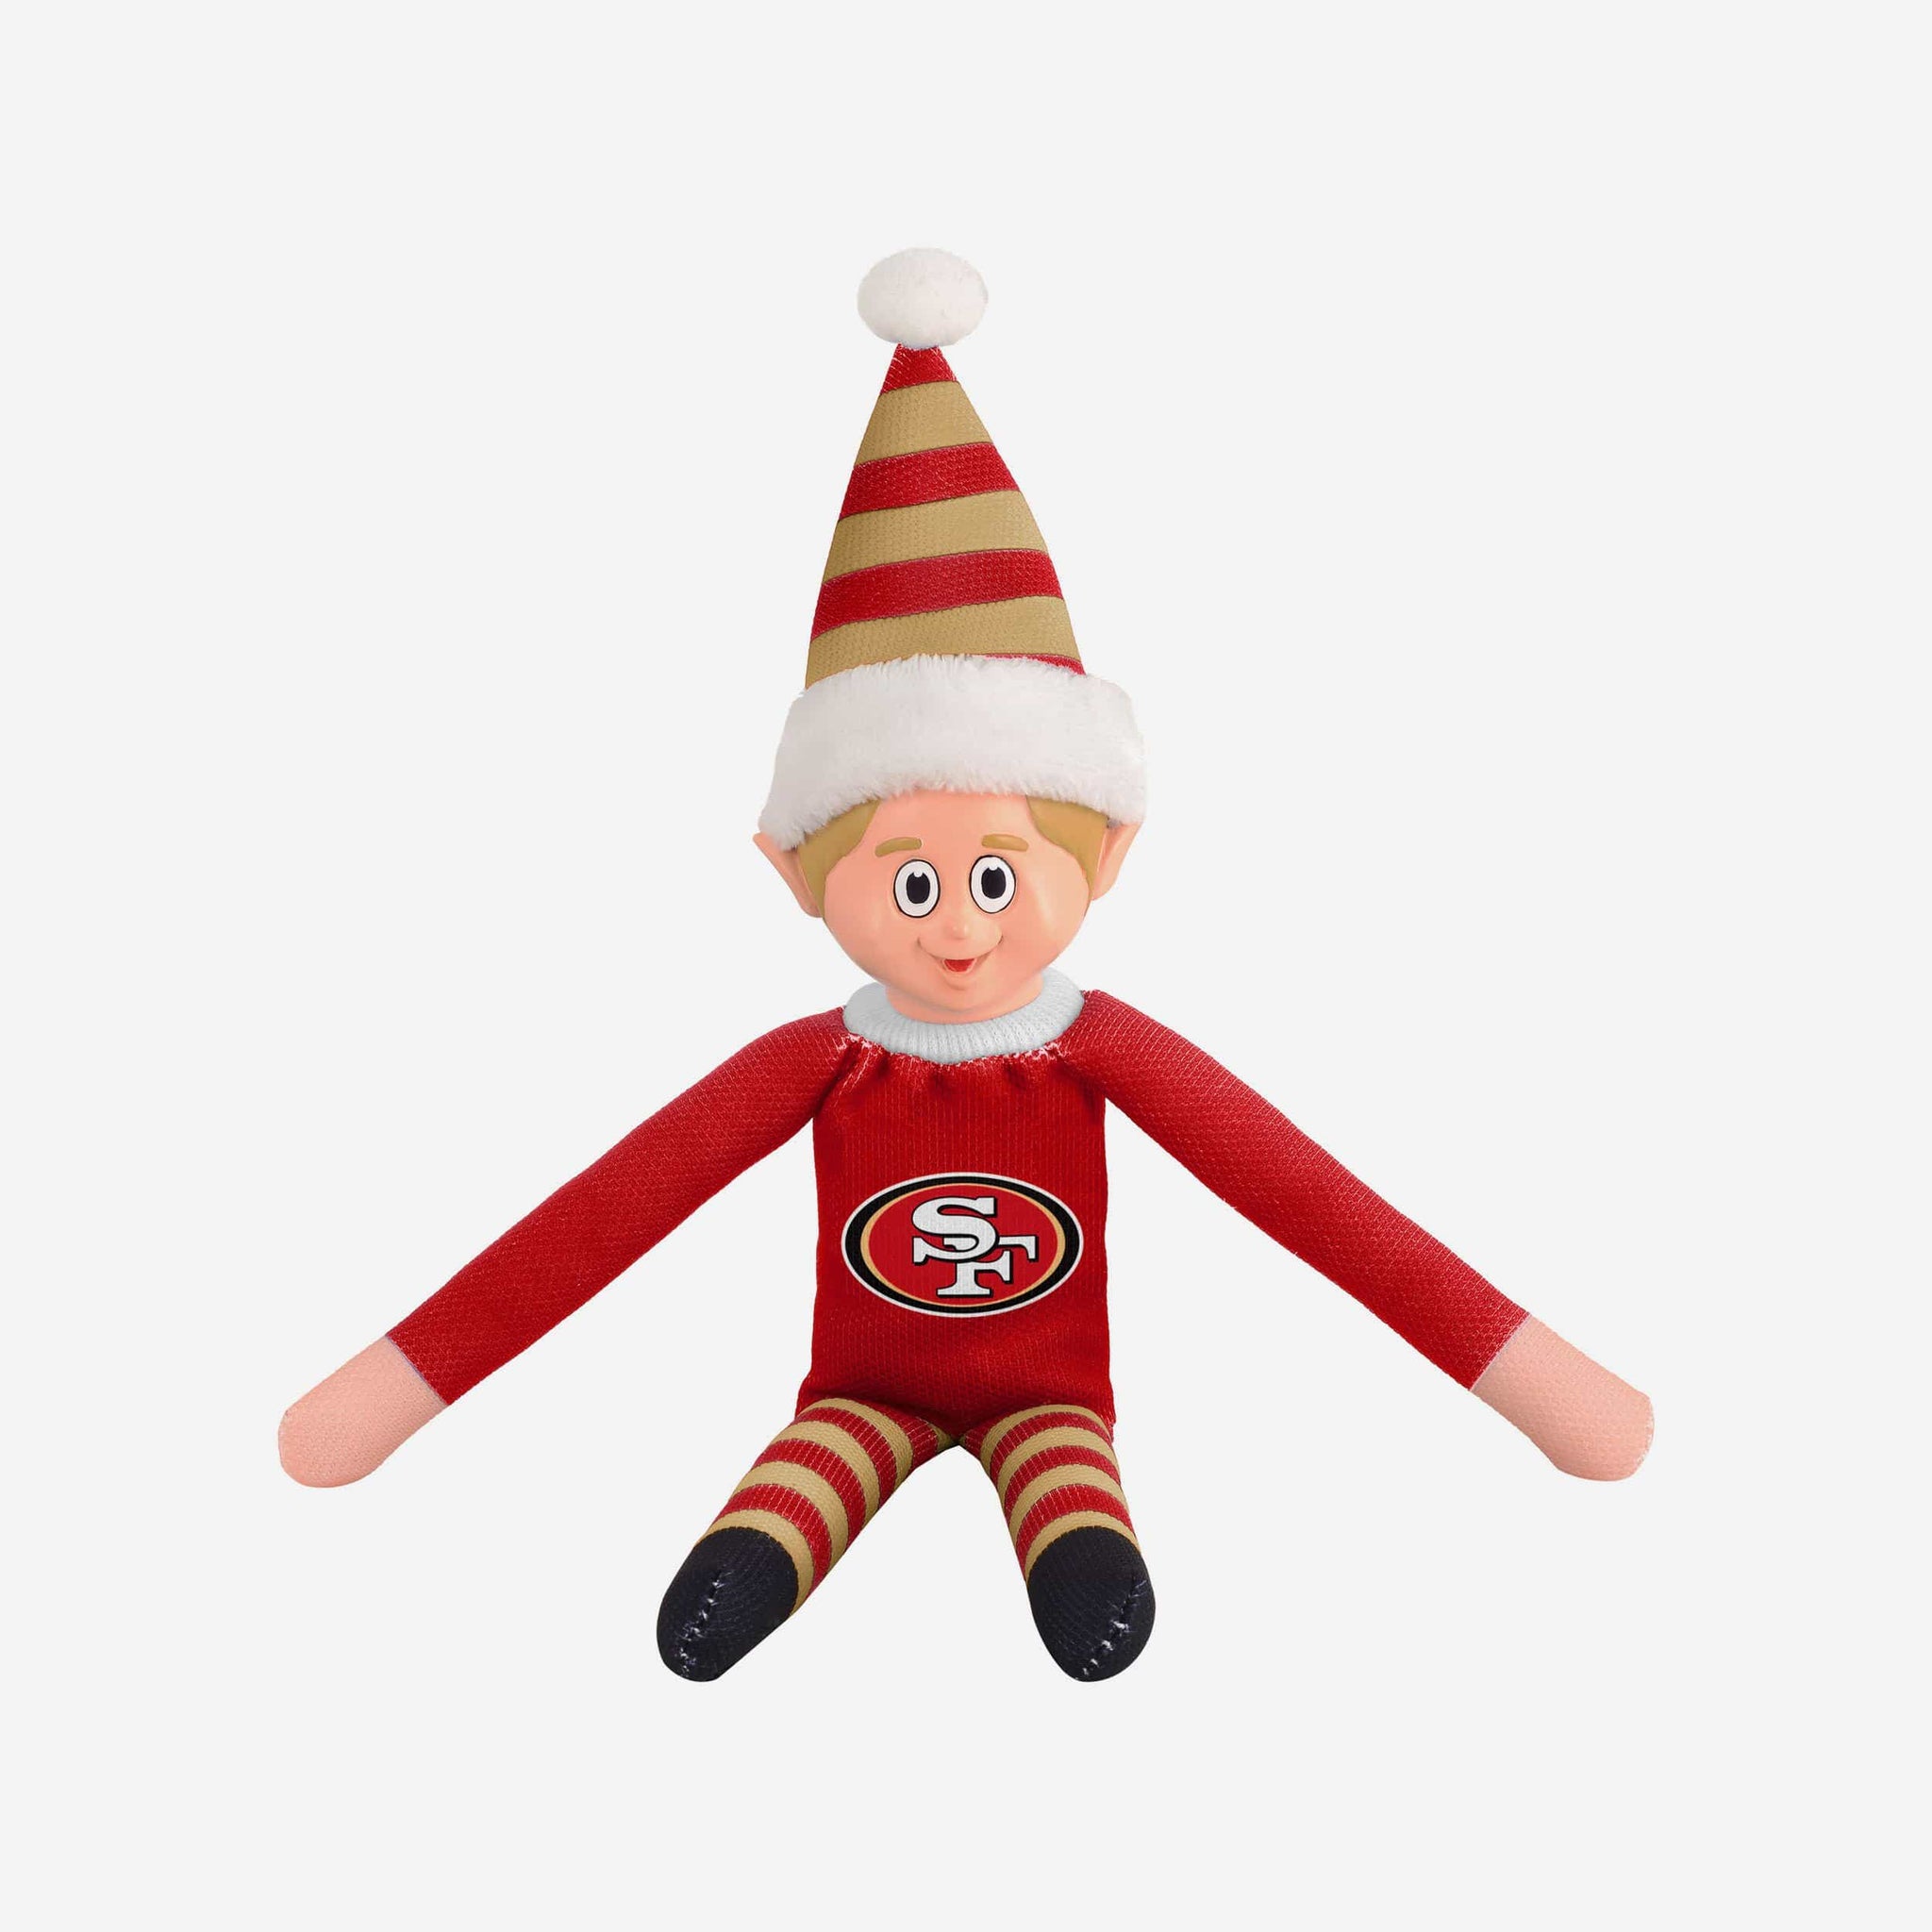 San Francisco 49ers – All Elffed Up!